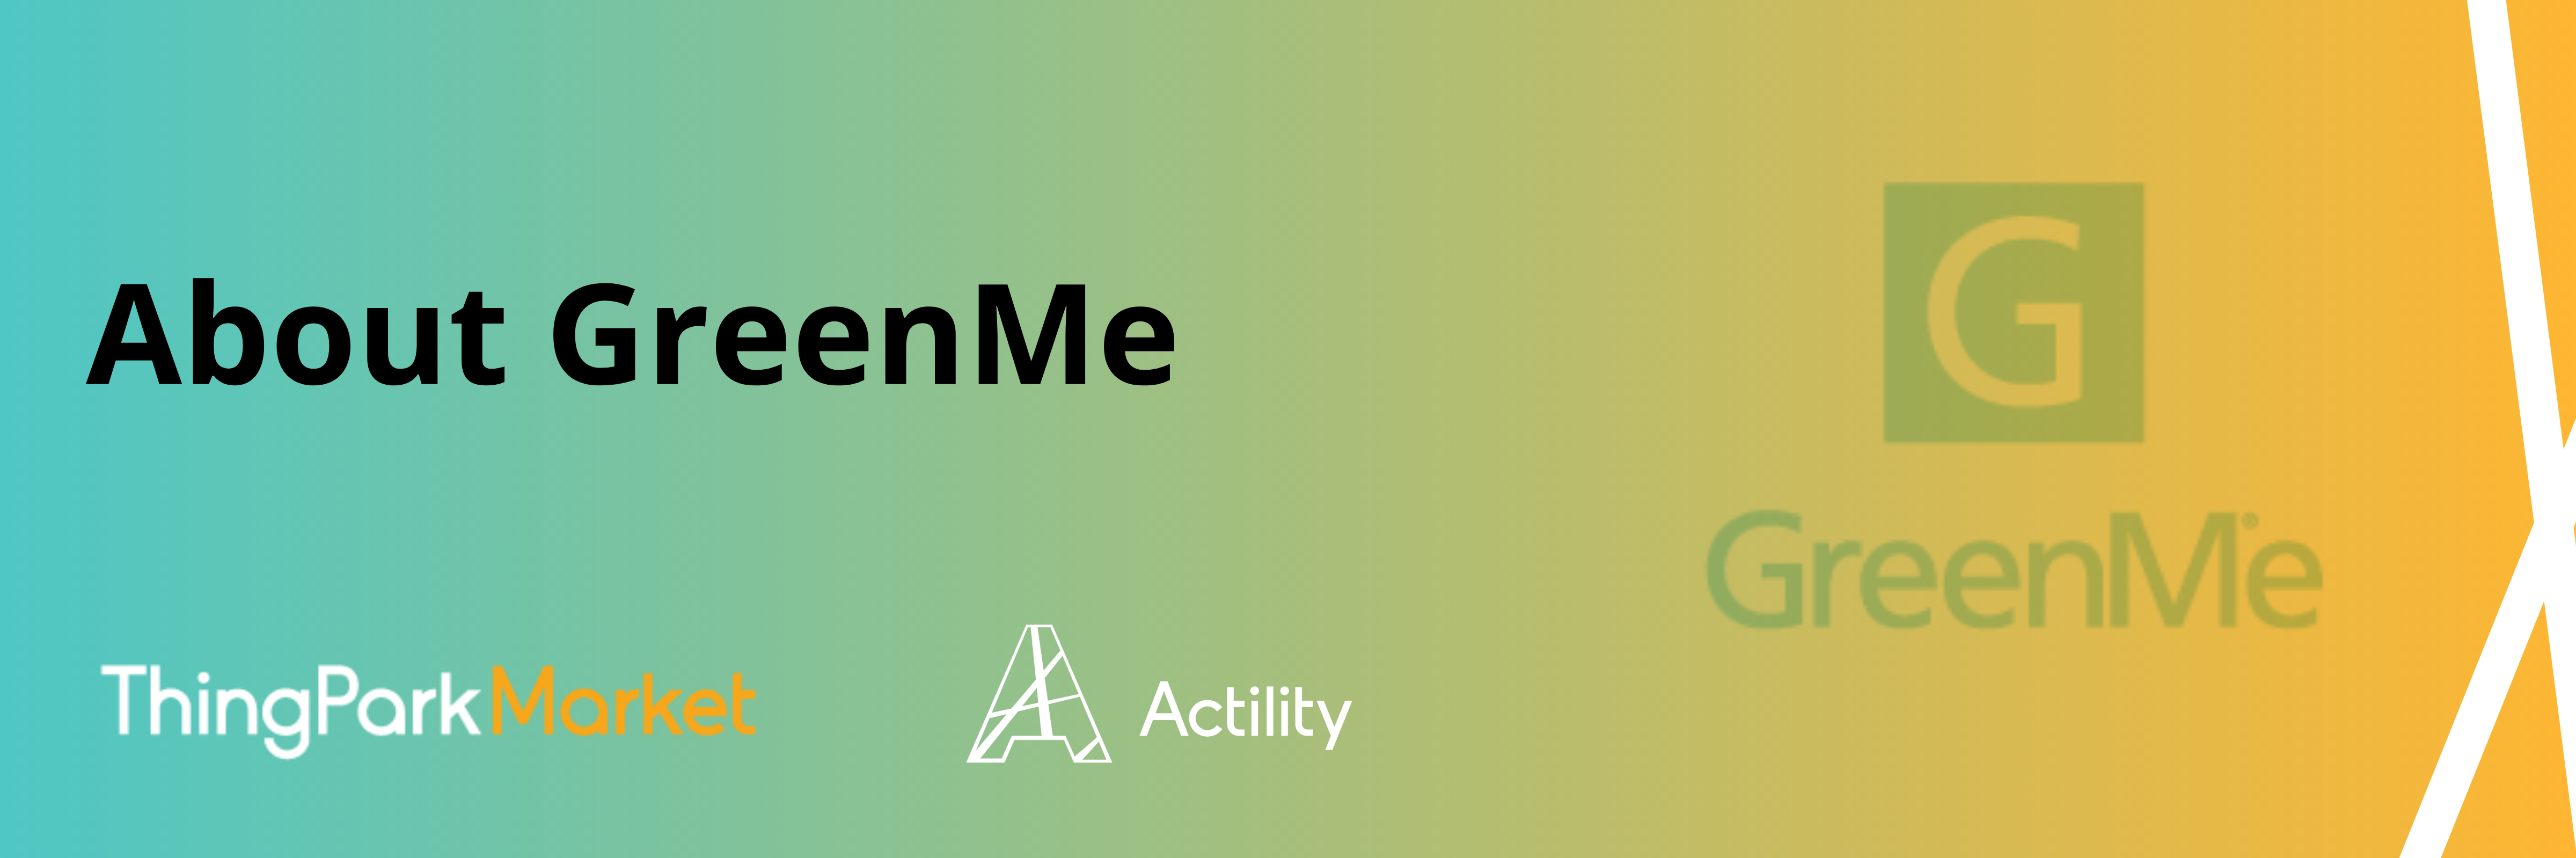 ABOUT GREENME    